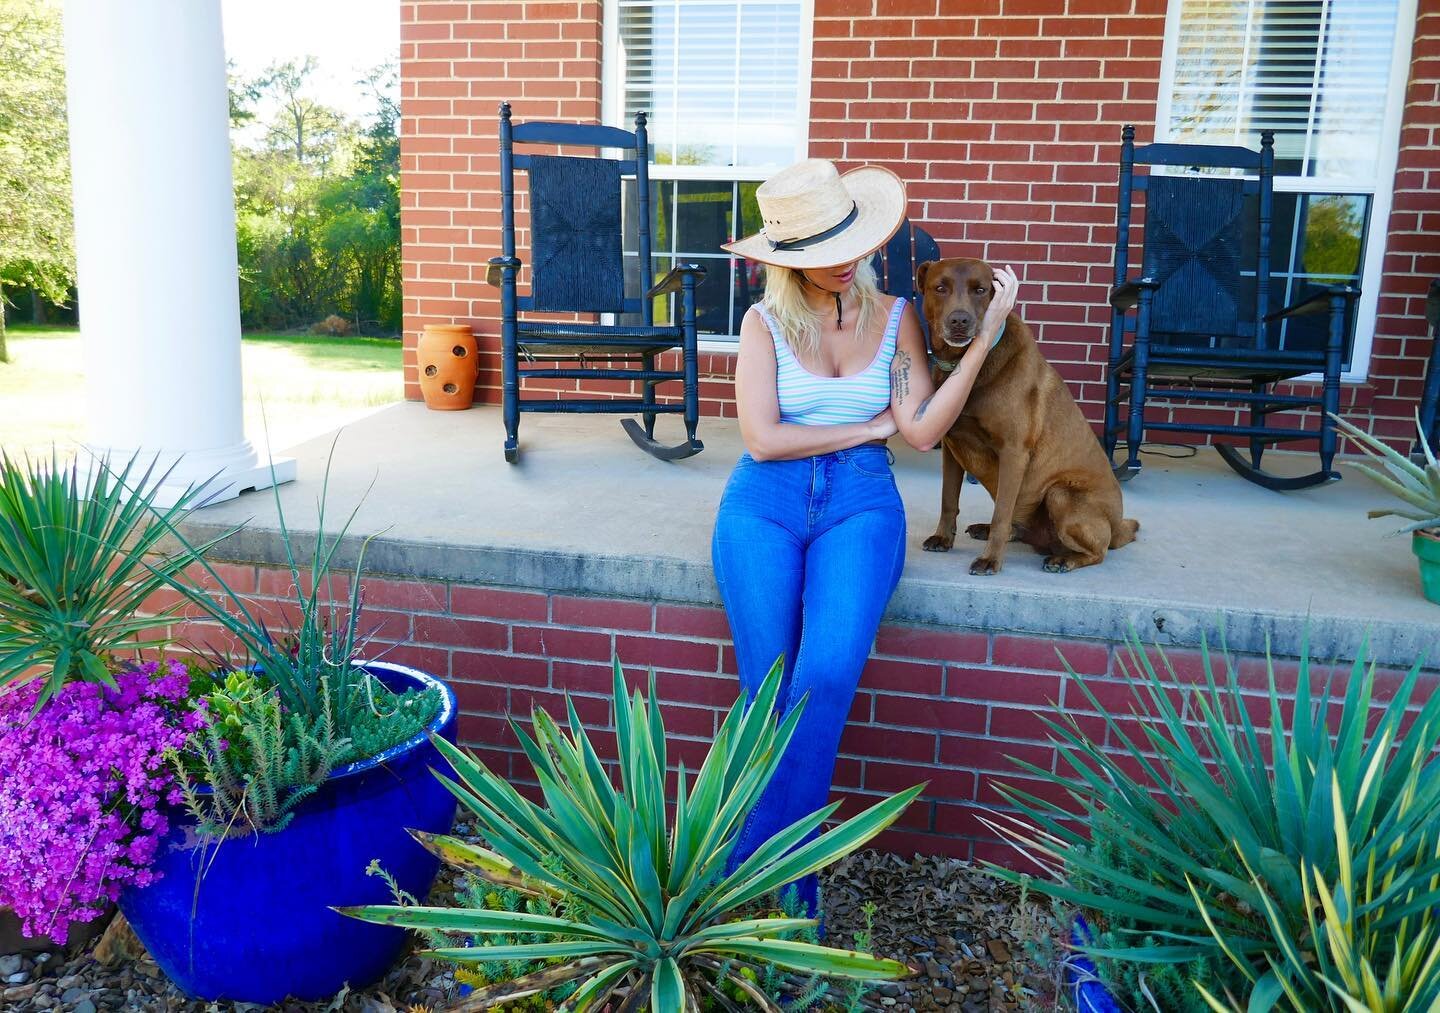 Home is where the heart is 💕 
.
.
.
.
.
.
.
.
.
.
.
.
.
#arkansas#zs100#colors#home#garden#cactus#dogs#family#memories#farm#outside#land